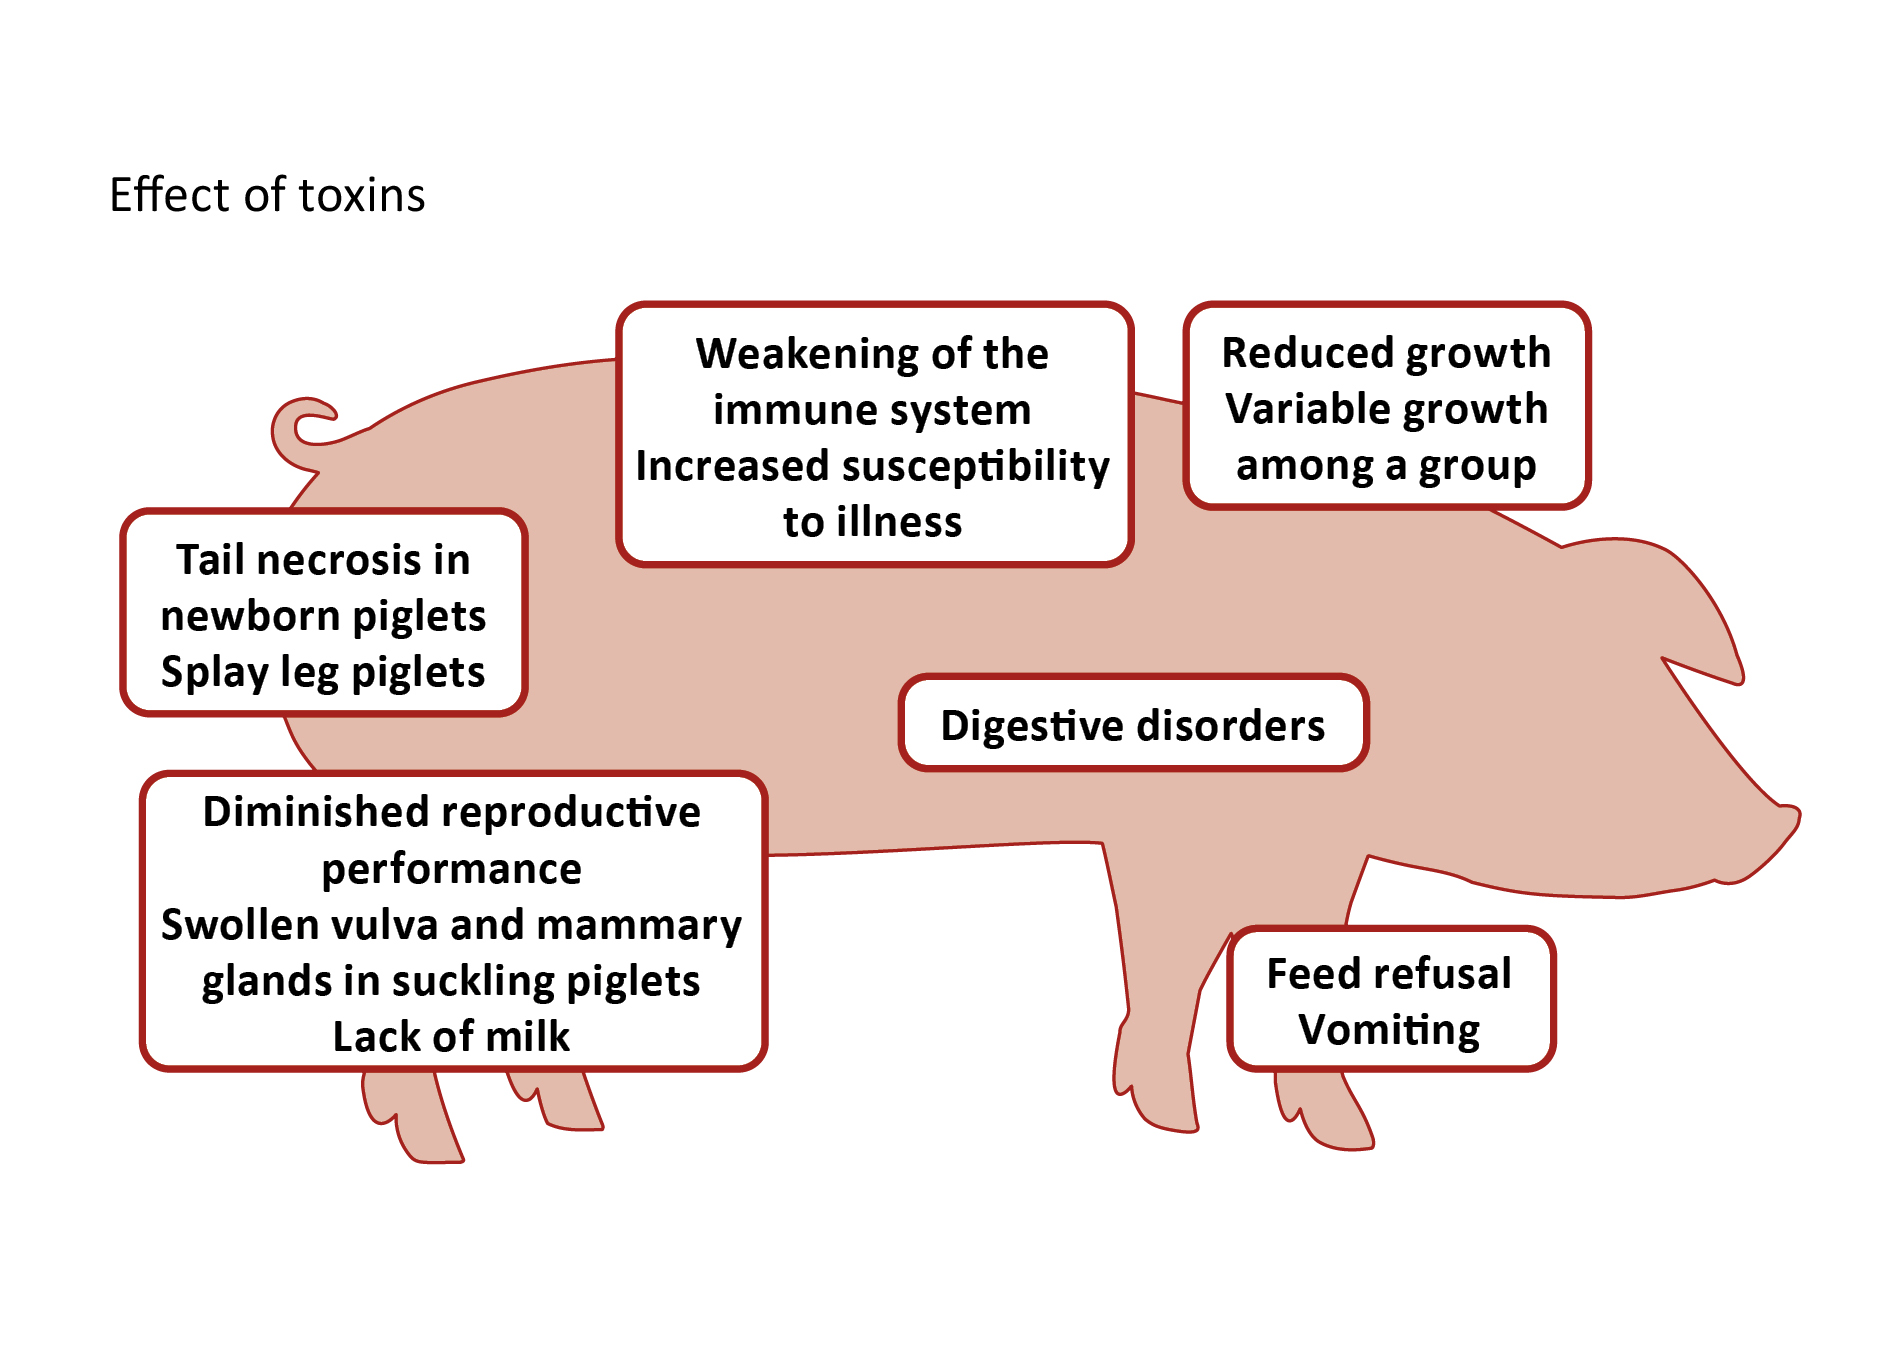 Effects of toxins on pigs